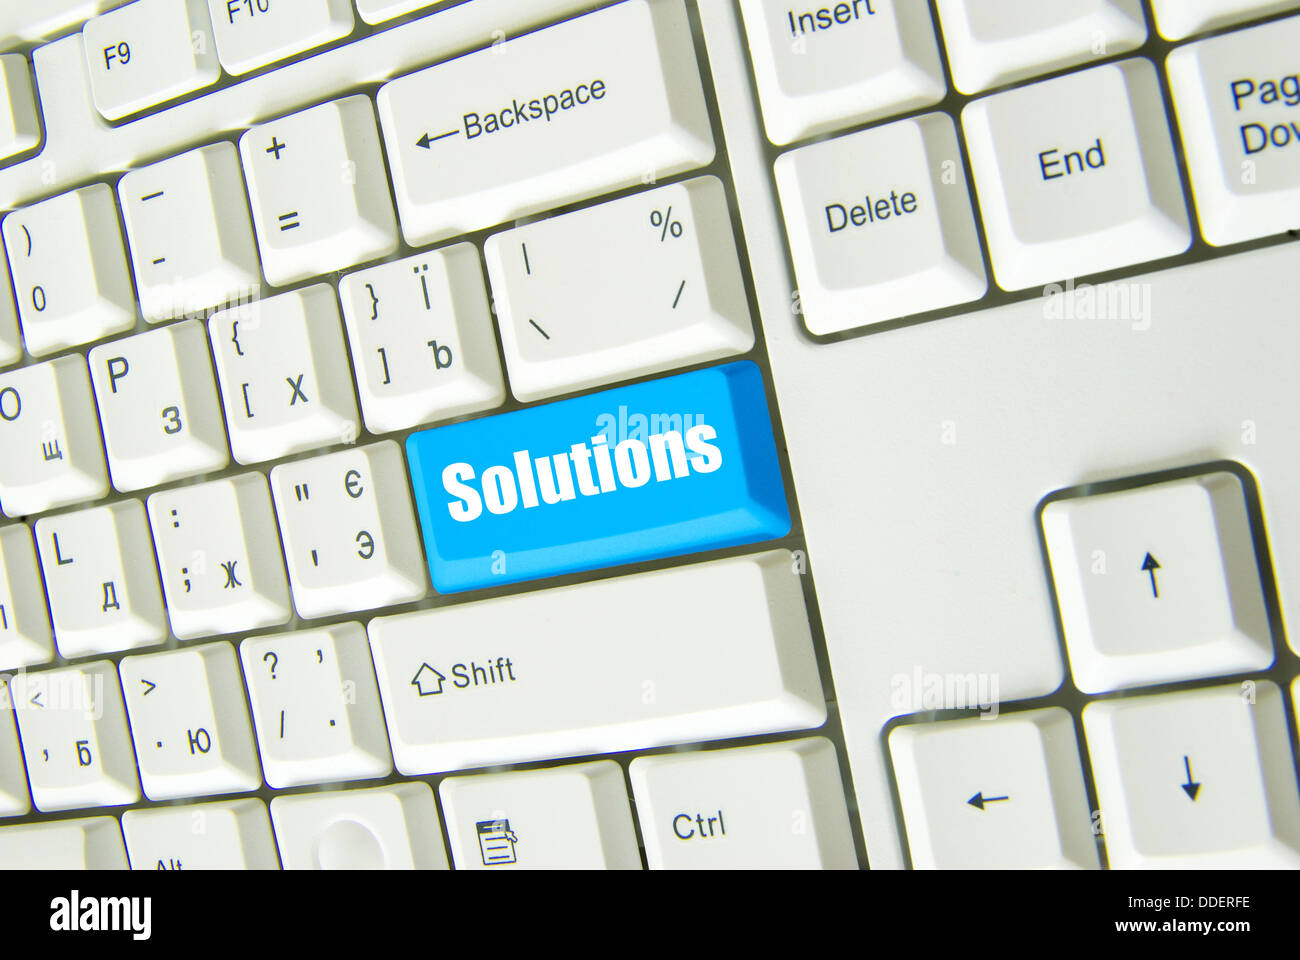 solutions Stock Photo